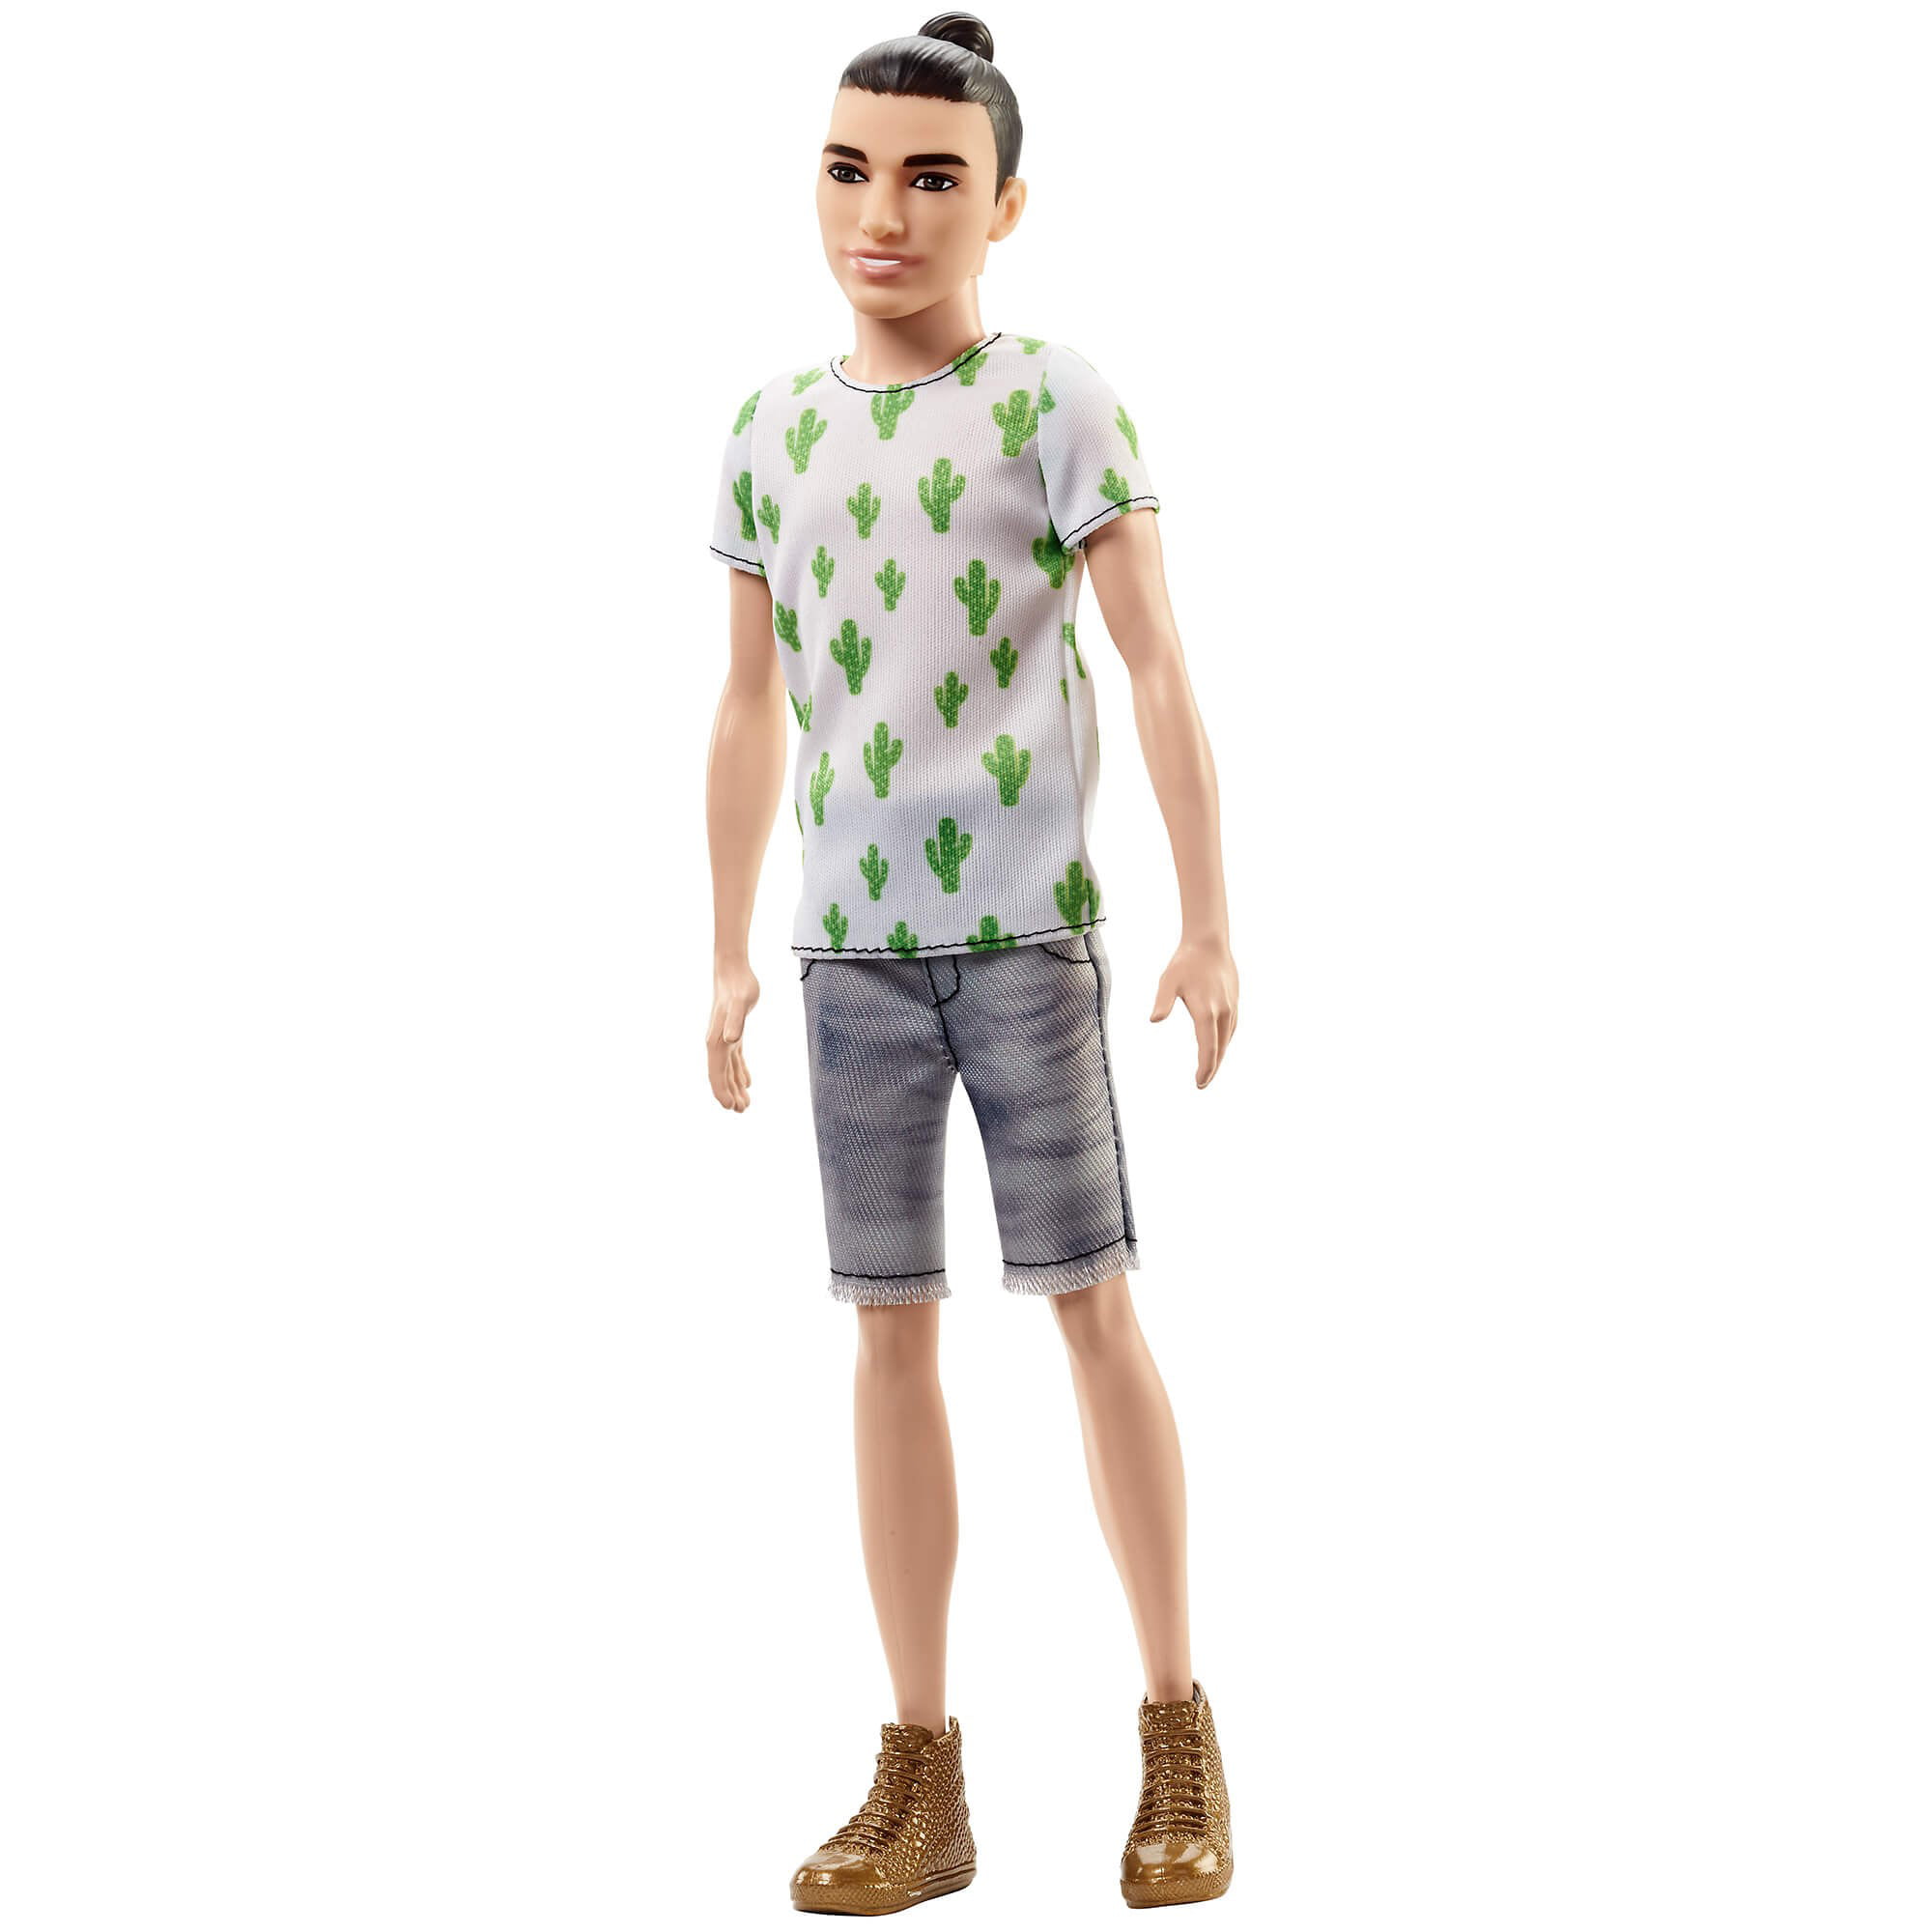 Barbie FJF74 Ken Fashionistas Doll in Cactus-look and manbun for Girls New 